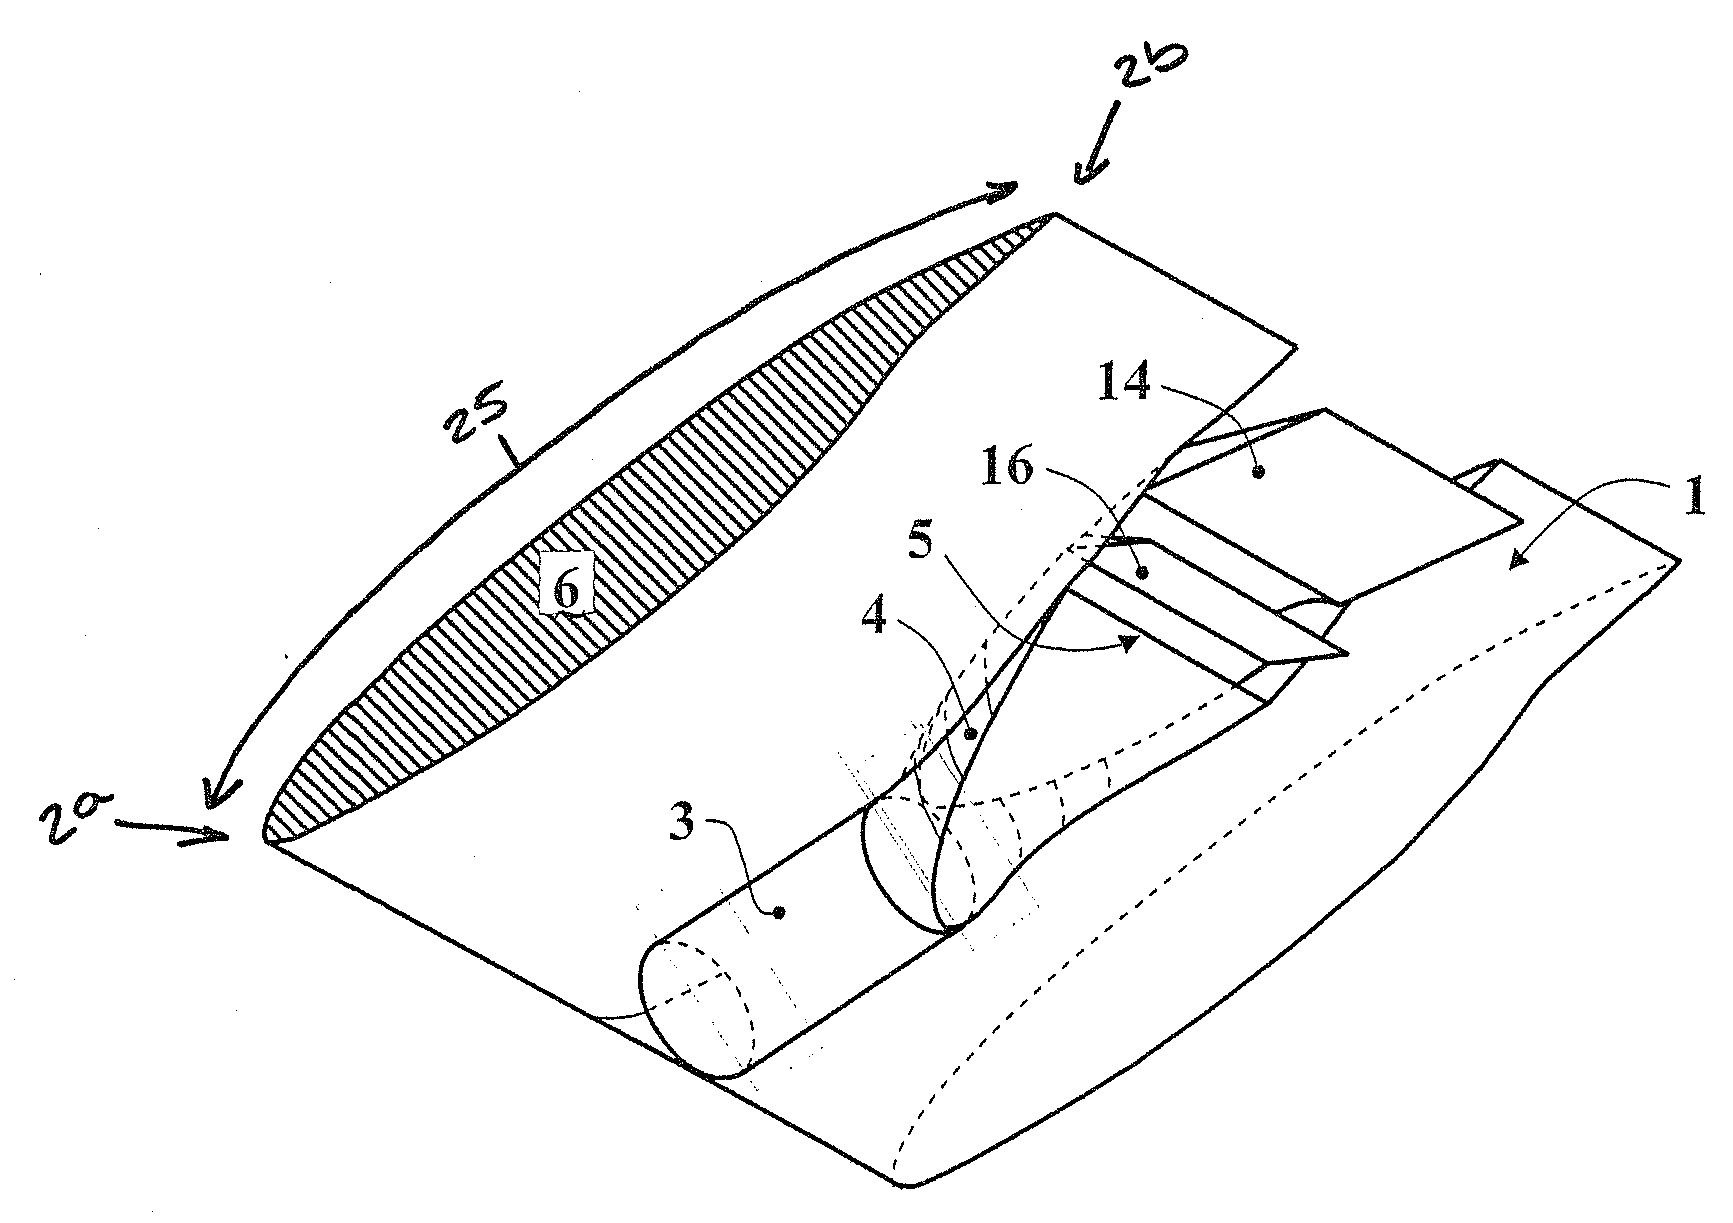 Airfoil having a movable control surface